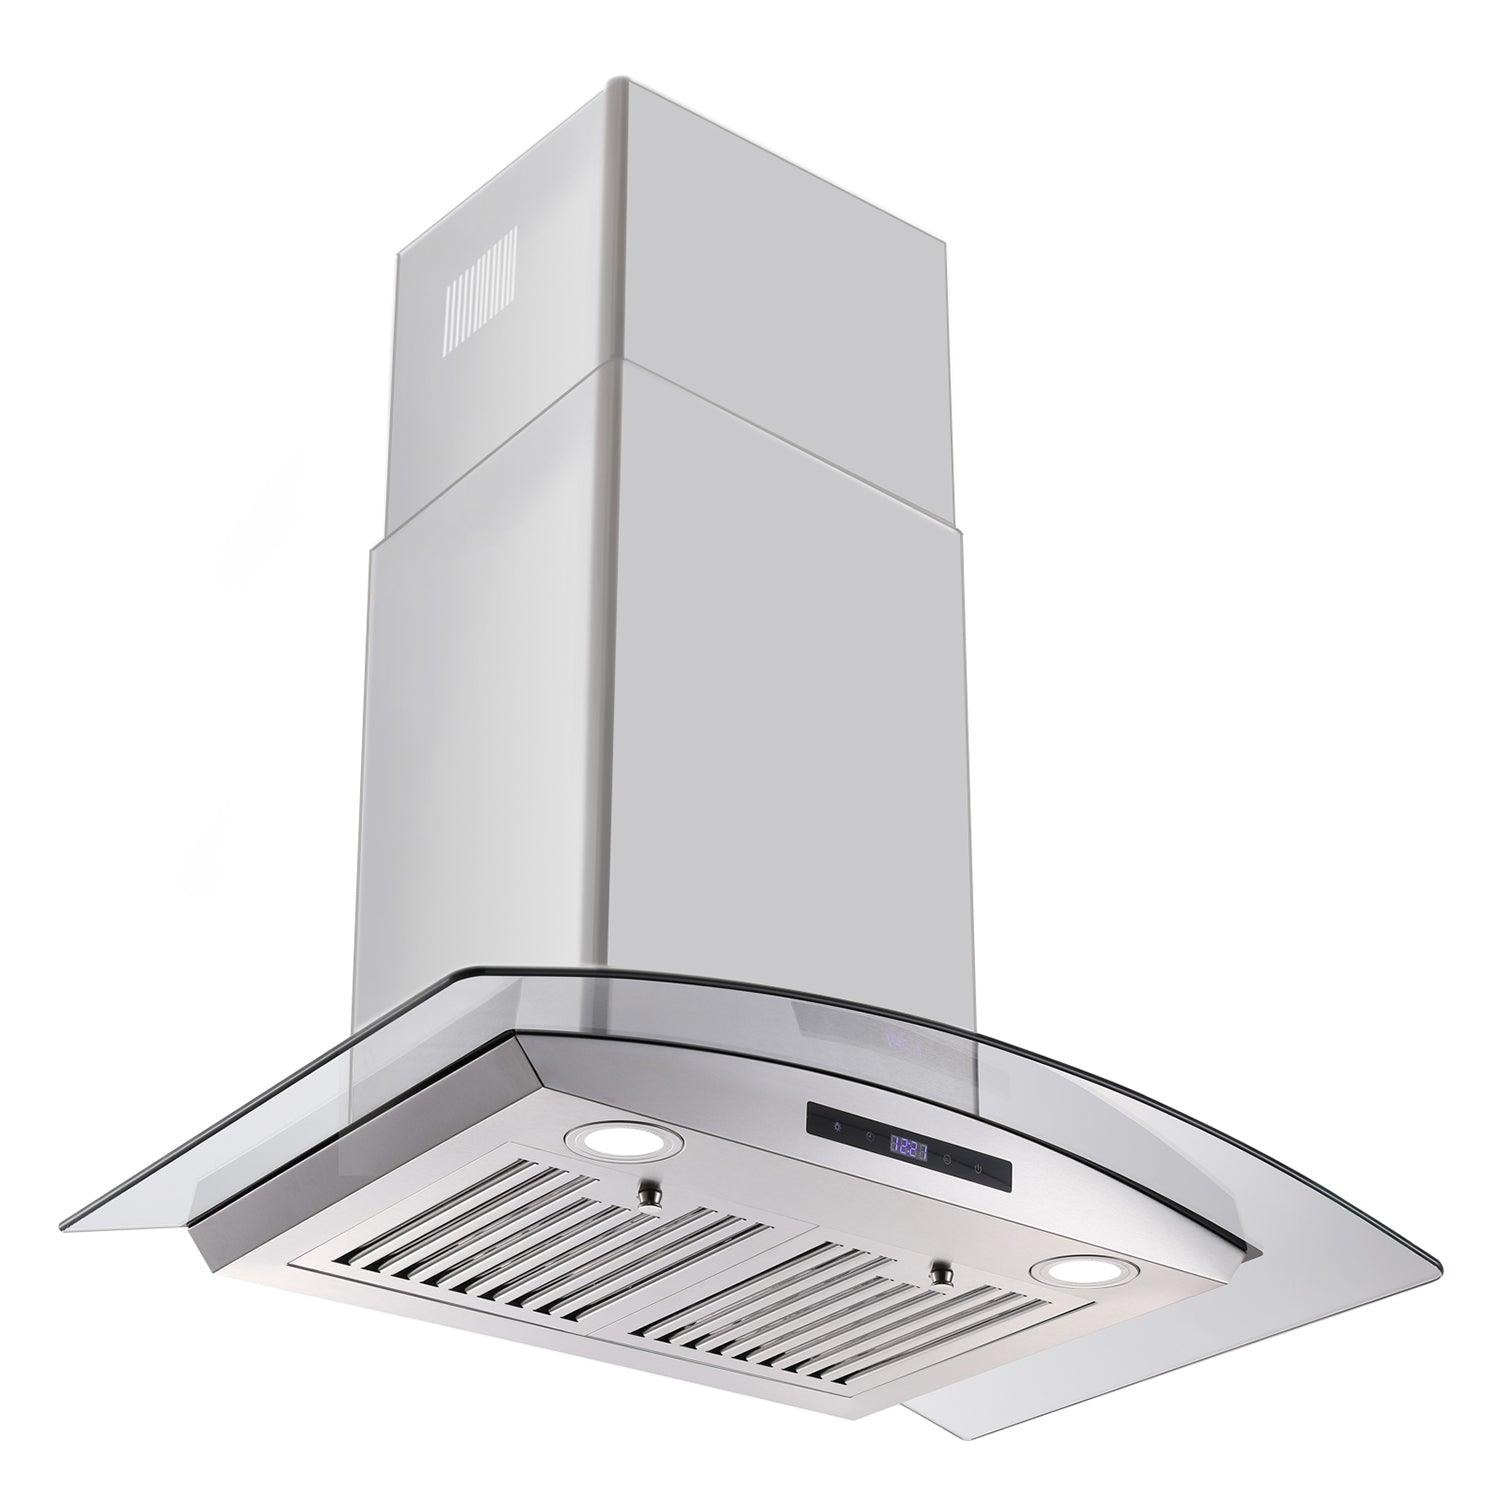 Tieasy Wall Mount Range Hood 30 inch with Ducted/Ductless